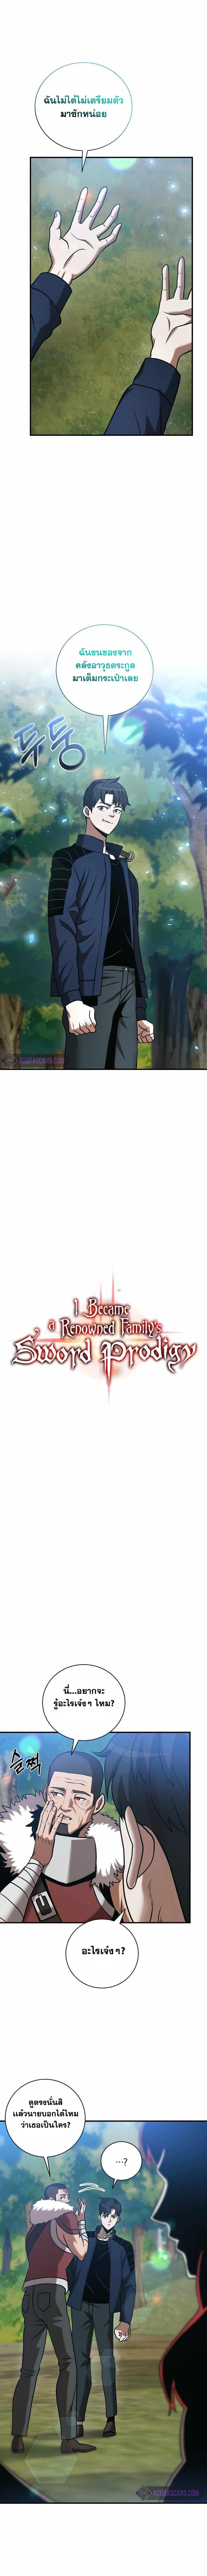 I-Became-a-Renowned-Familys-Sword-Prodigy20-1.jpg